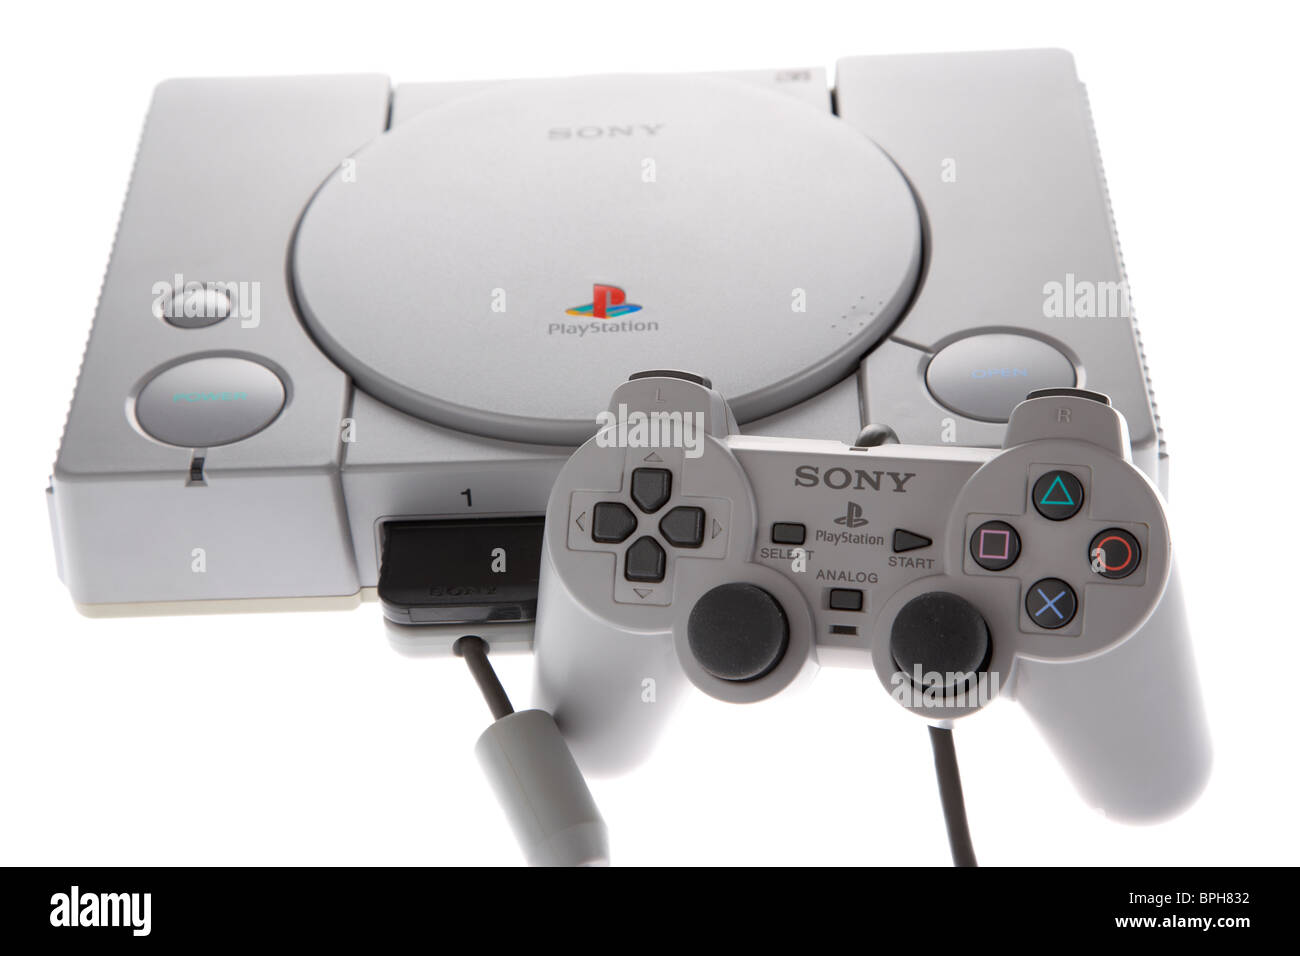 original playstation psone console and dual shock controller from the 90s retro gaming old historic games machine Stock Photo